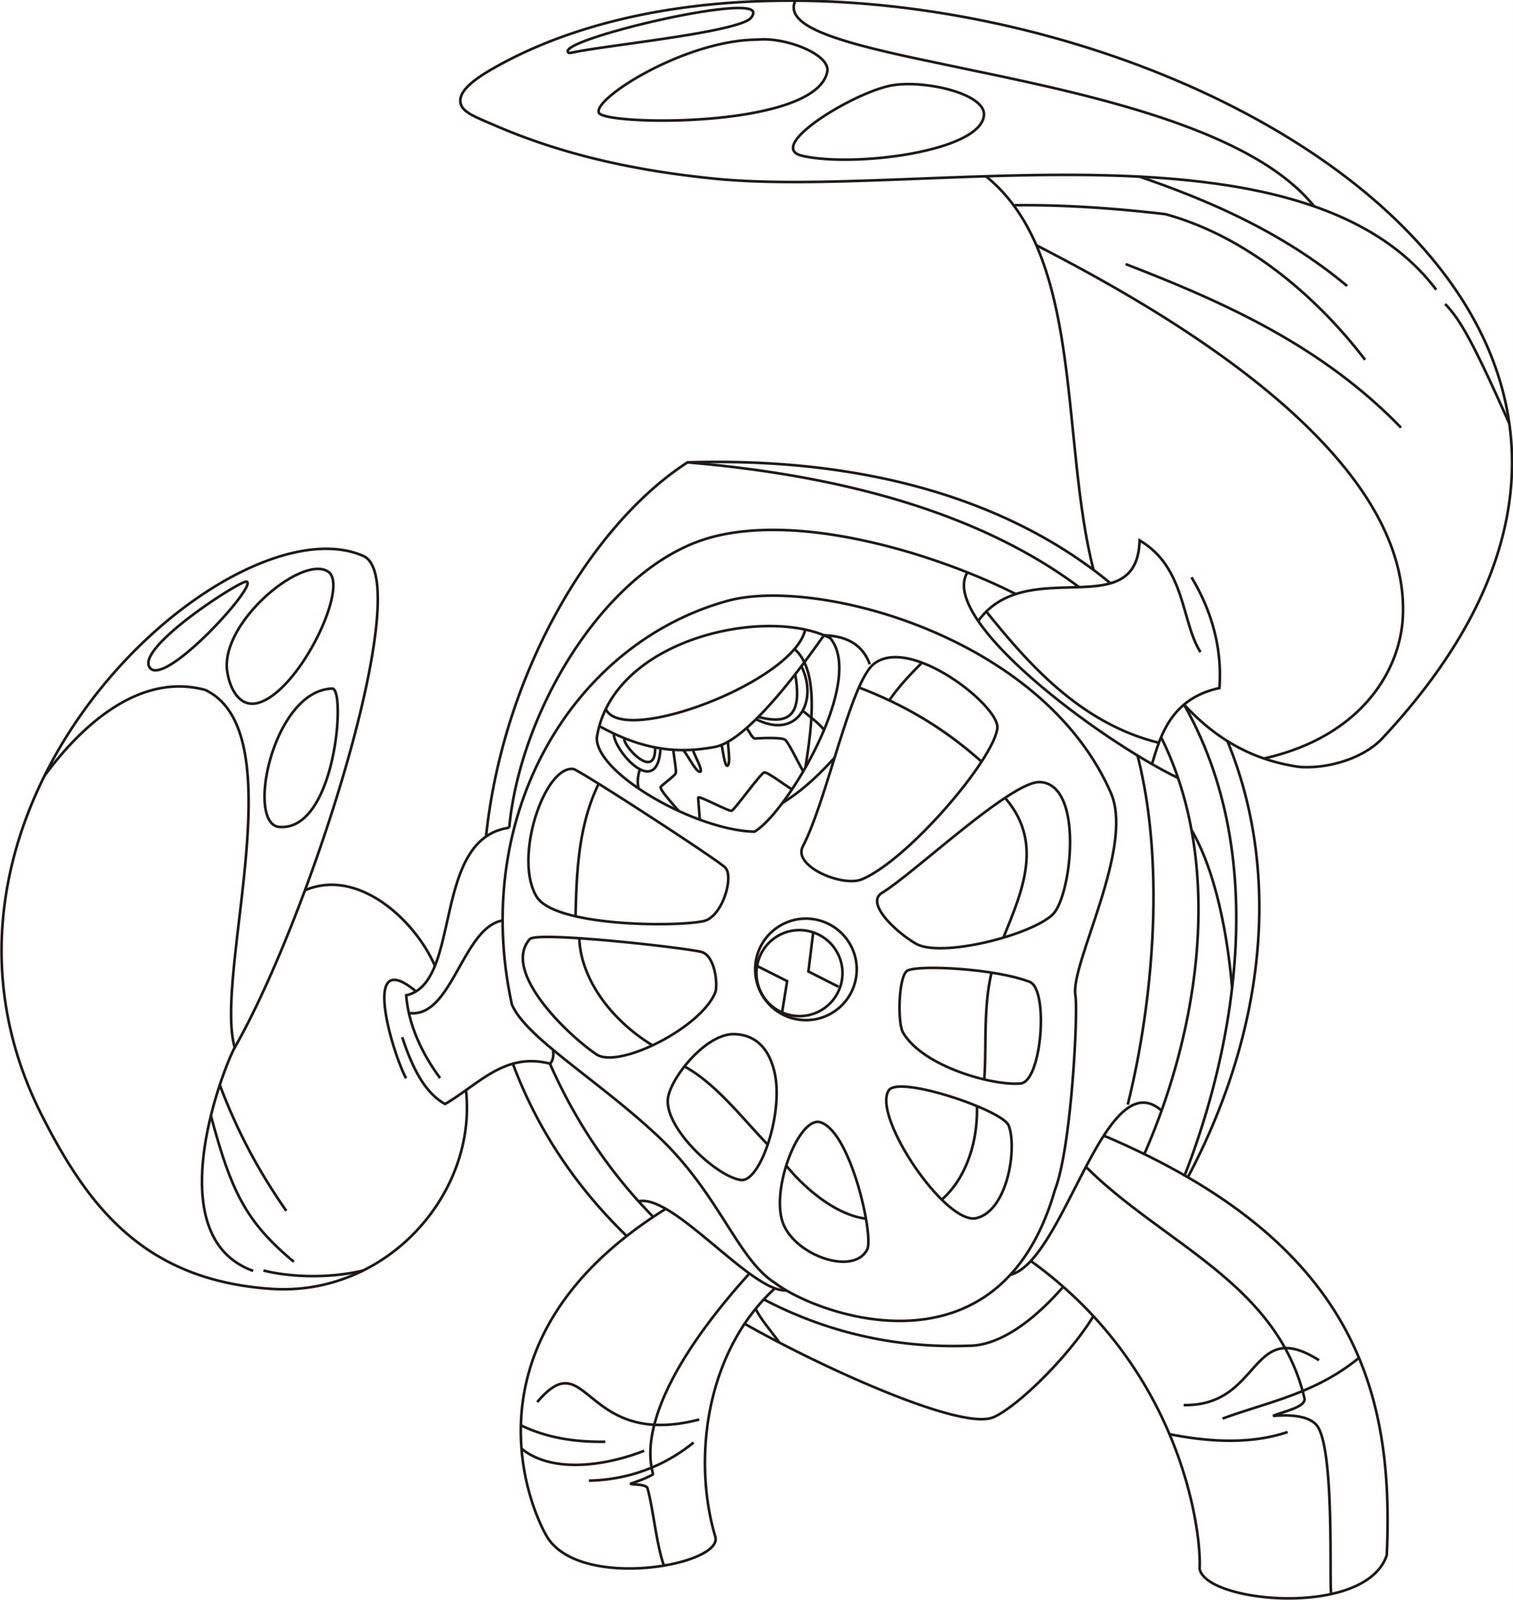 Coloring Pages - Ben 10 Wiki - Wikia